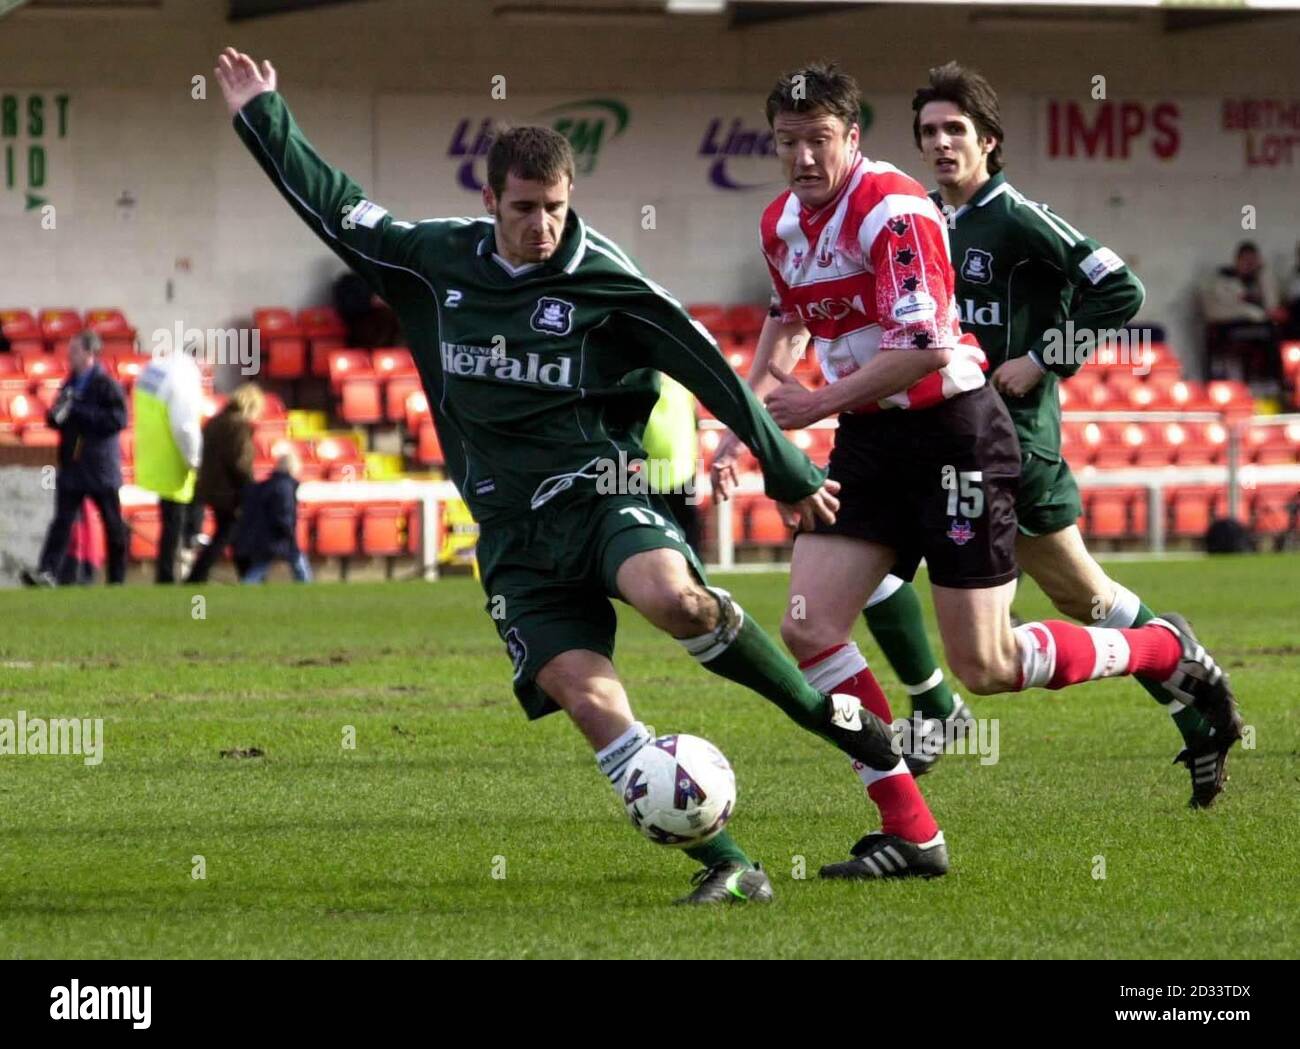 Lincoln City's Grant Brown (right) watches Plymouth Argyle's Kevin Wills (left), during their Nationwide Division Three match at Lincoln's Sincil Bank ground. THIS PICTURE CAN ONLY BE USED WITHIN THE CONTEXT OF AN EDITORIAL FEATURE. NO UNOFFICIAL CLUB WEBSITE USE. Stock Photo